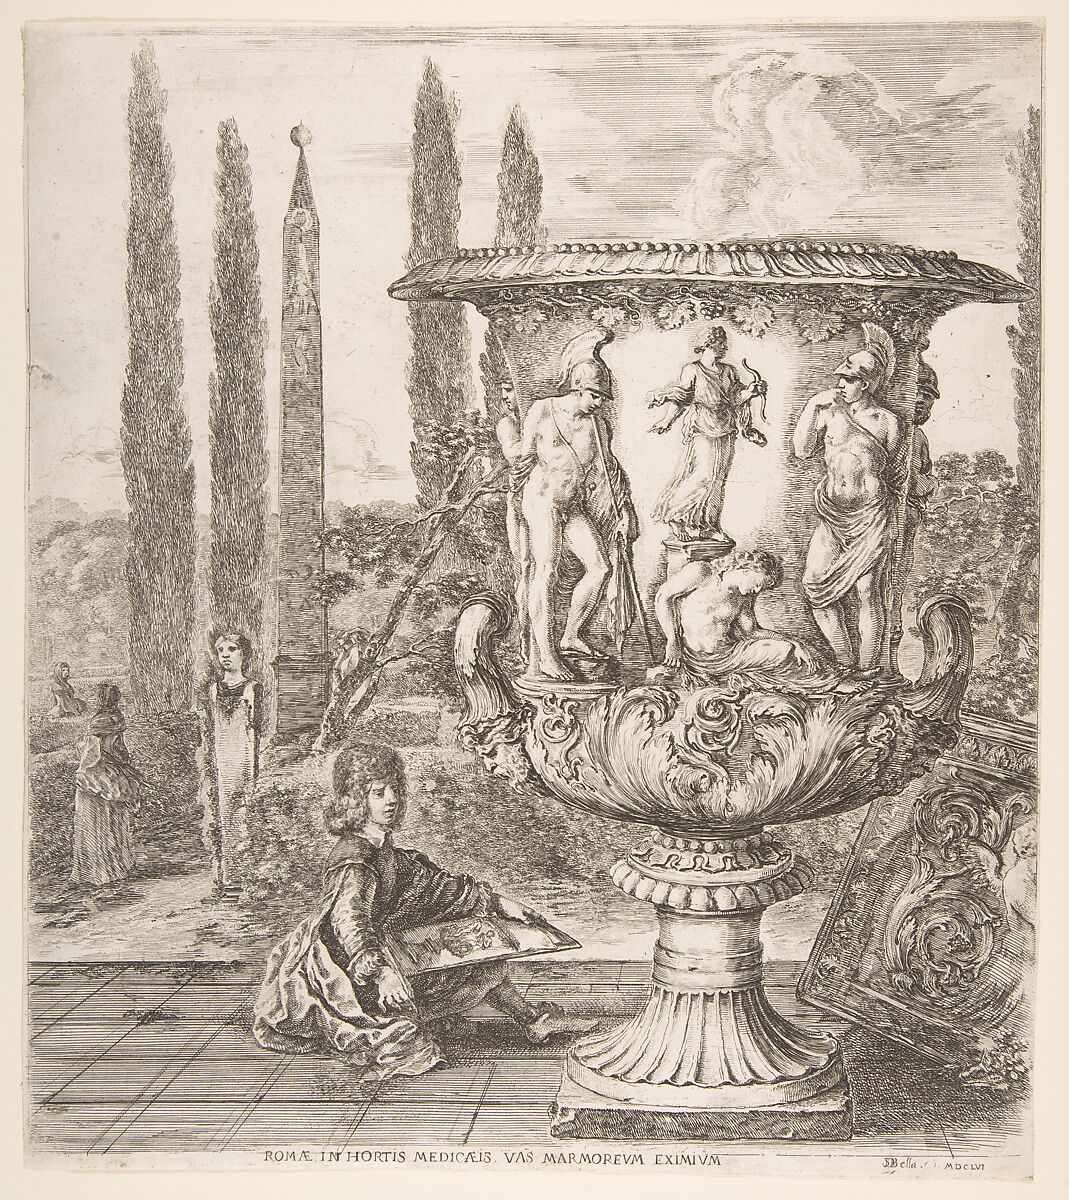 The Medici vase, a large vase to right decorated with a representation of the sacrifice of Iphigenia, on a garden terrace, a teenage boy seated to left with a pen and paper with a drawing of the vase, cyprus trees and an obelisk to left in the background, from "Six large views, four of Rome, and two of the Roman countryside" (Six grandes vues, dont quatre de Rome et deux de la Campagne romaine), Stefano della Bella (Italian, Florence 1610–1664 Florence), Etching; second state of two 